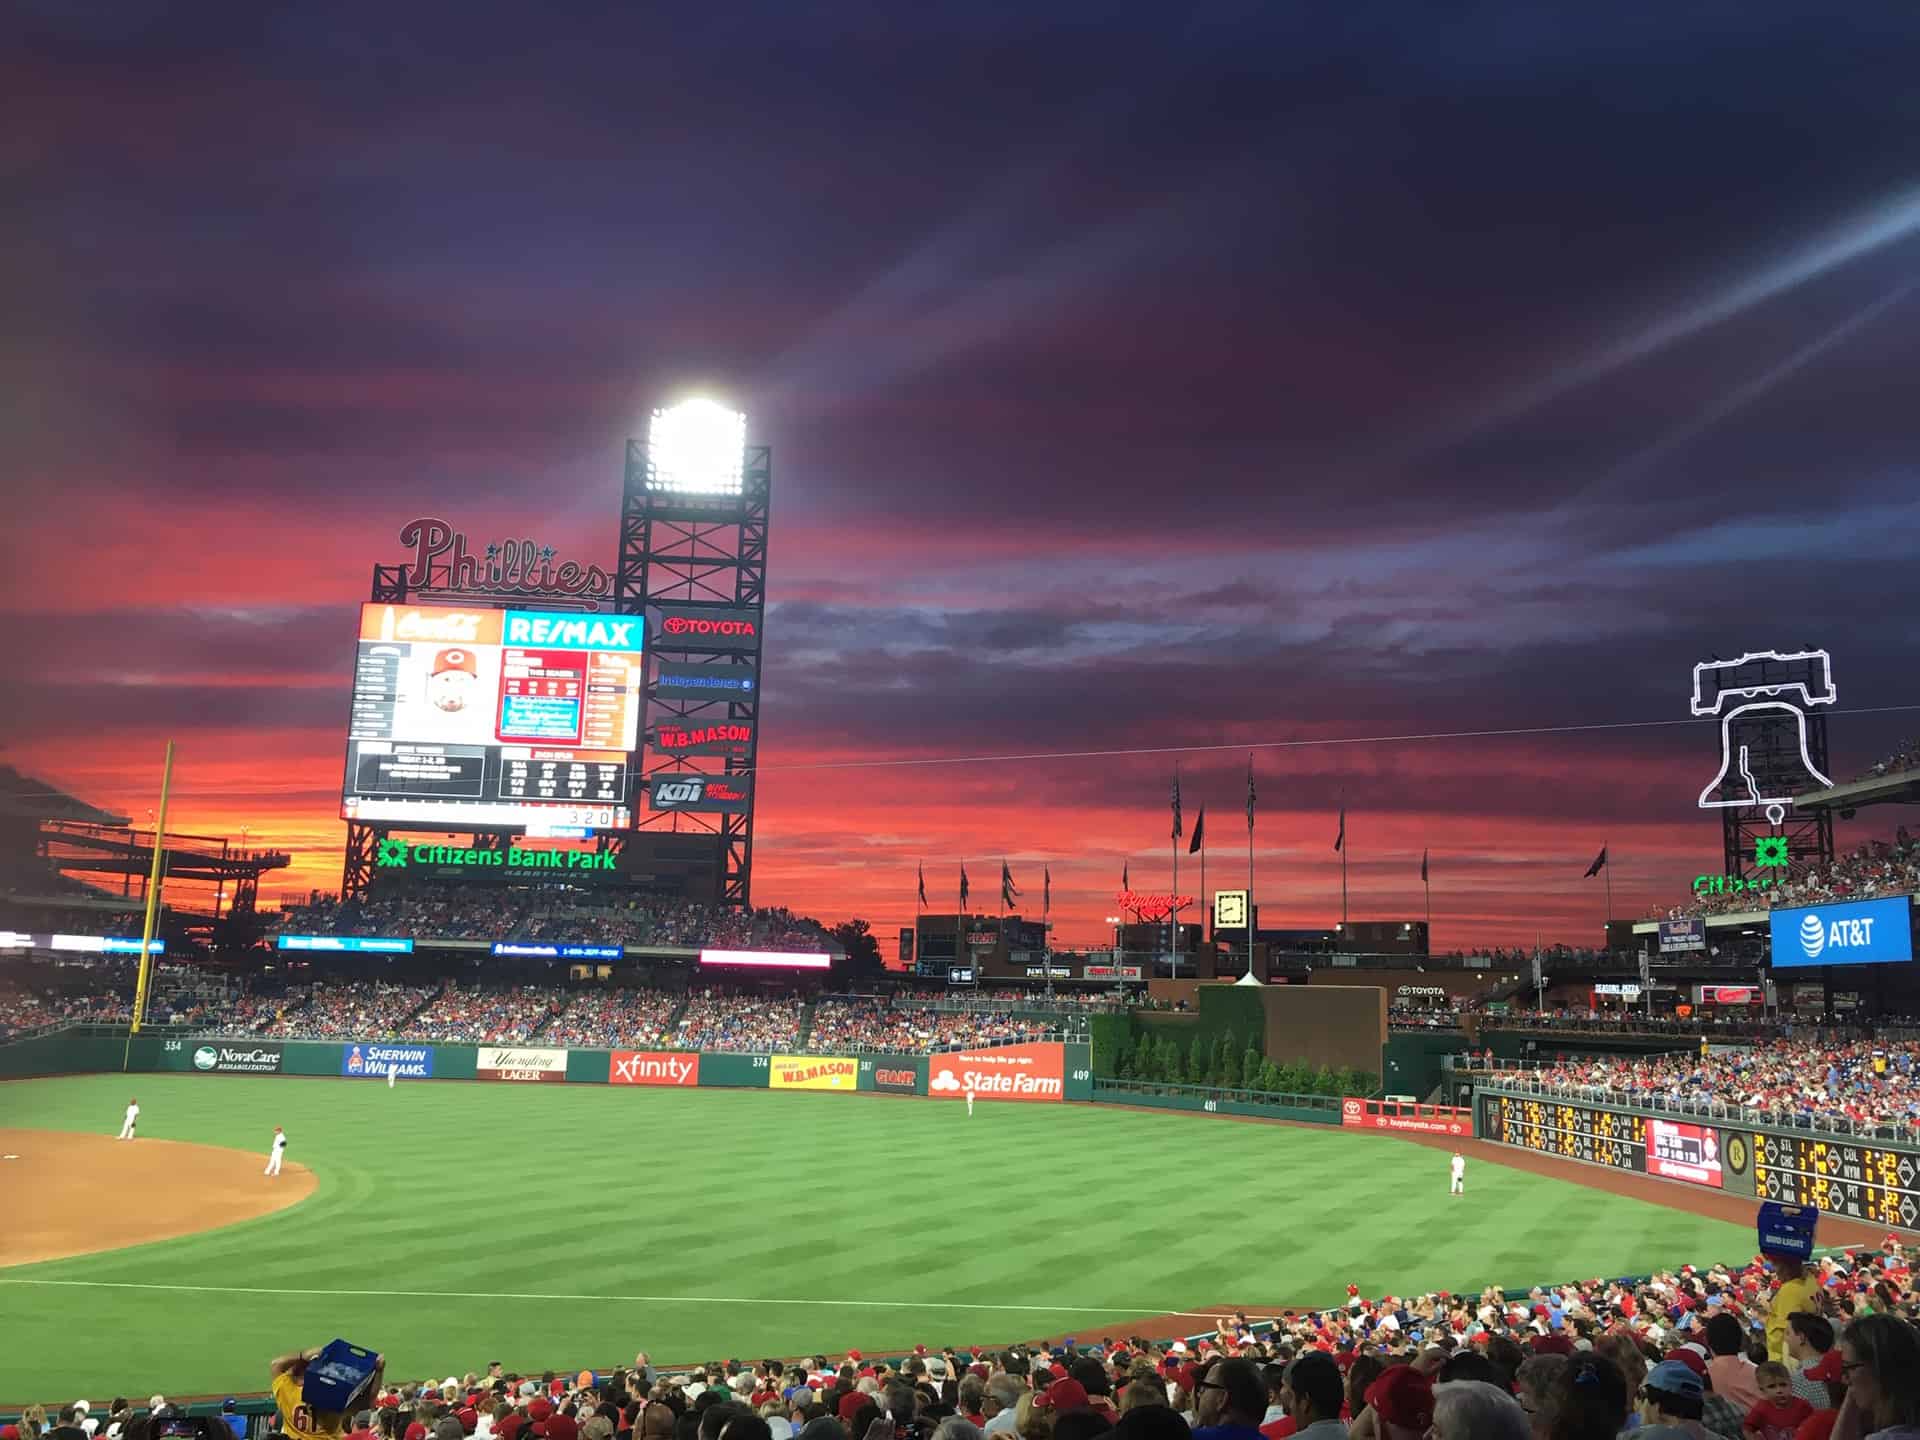 Citizen's Bank Park at sunset - Picture of Citizens Bank Park